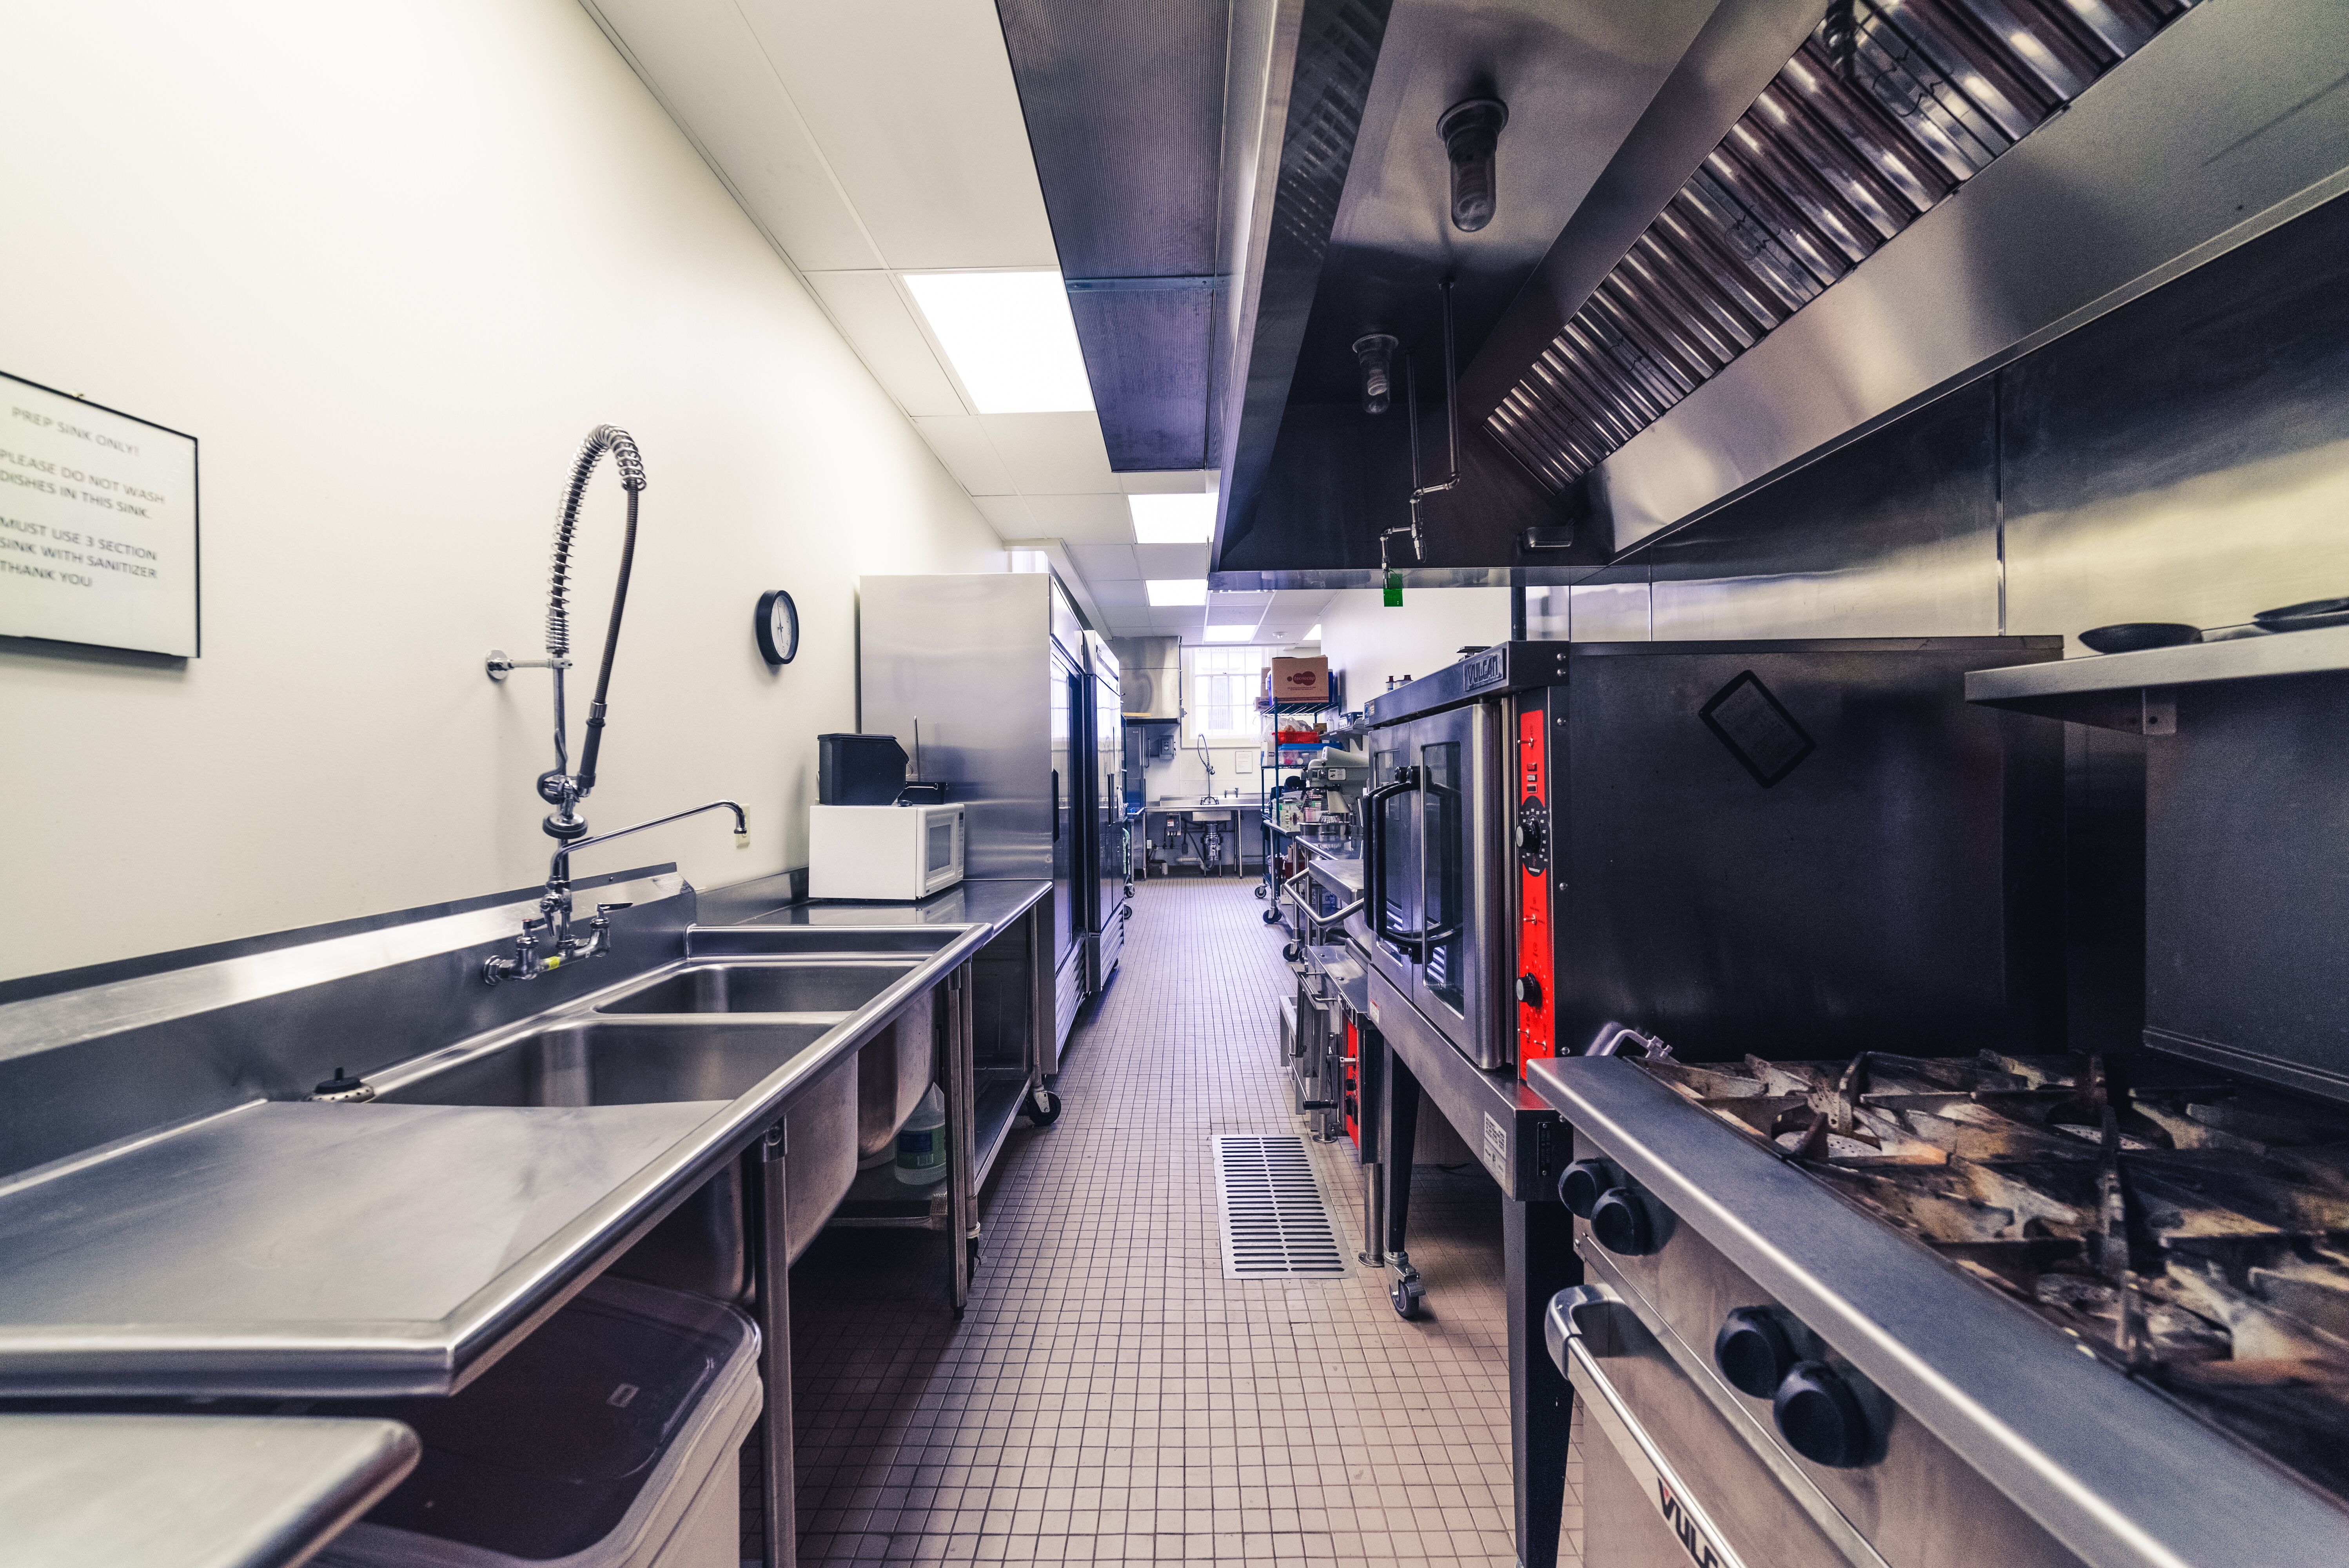 incubator kitchen manager position